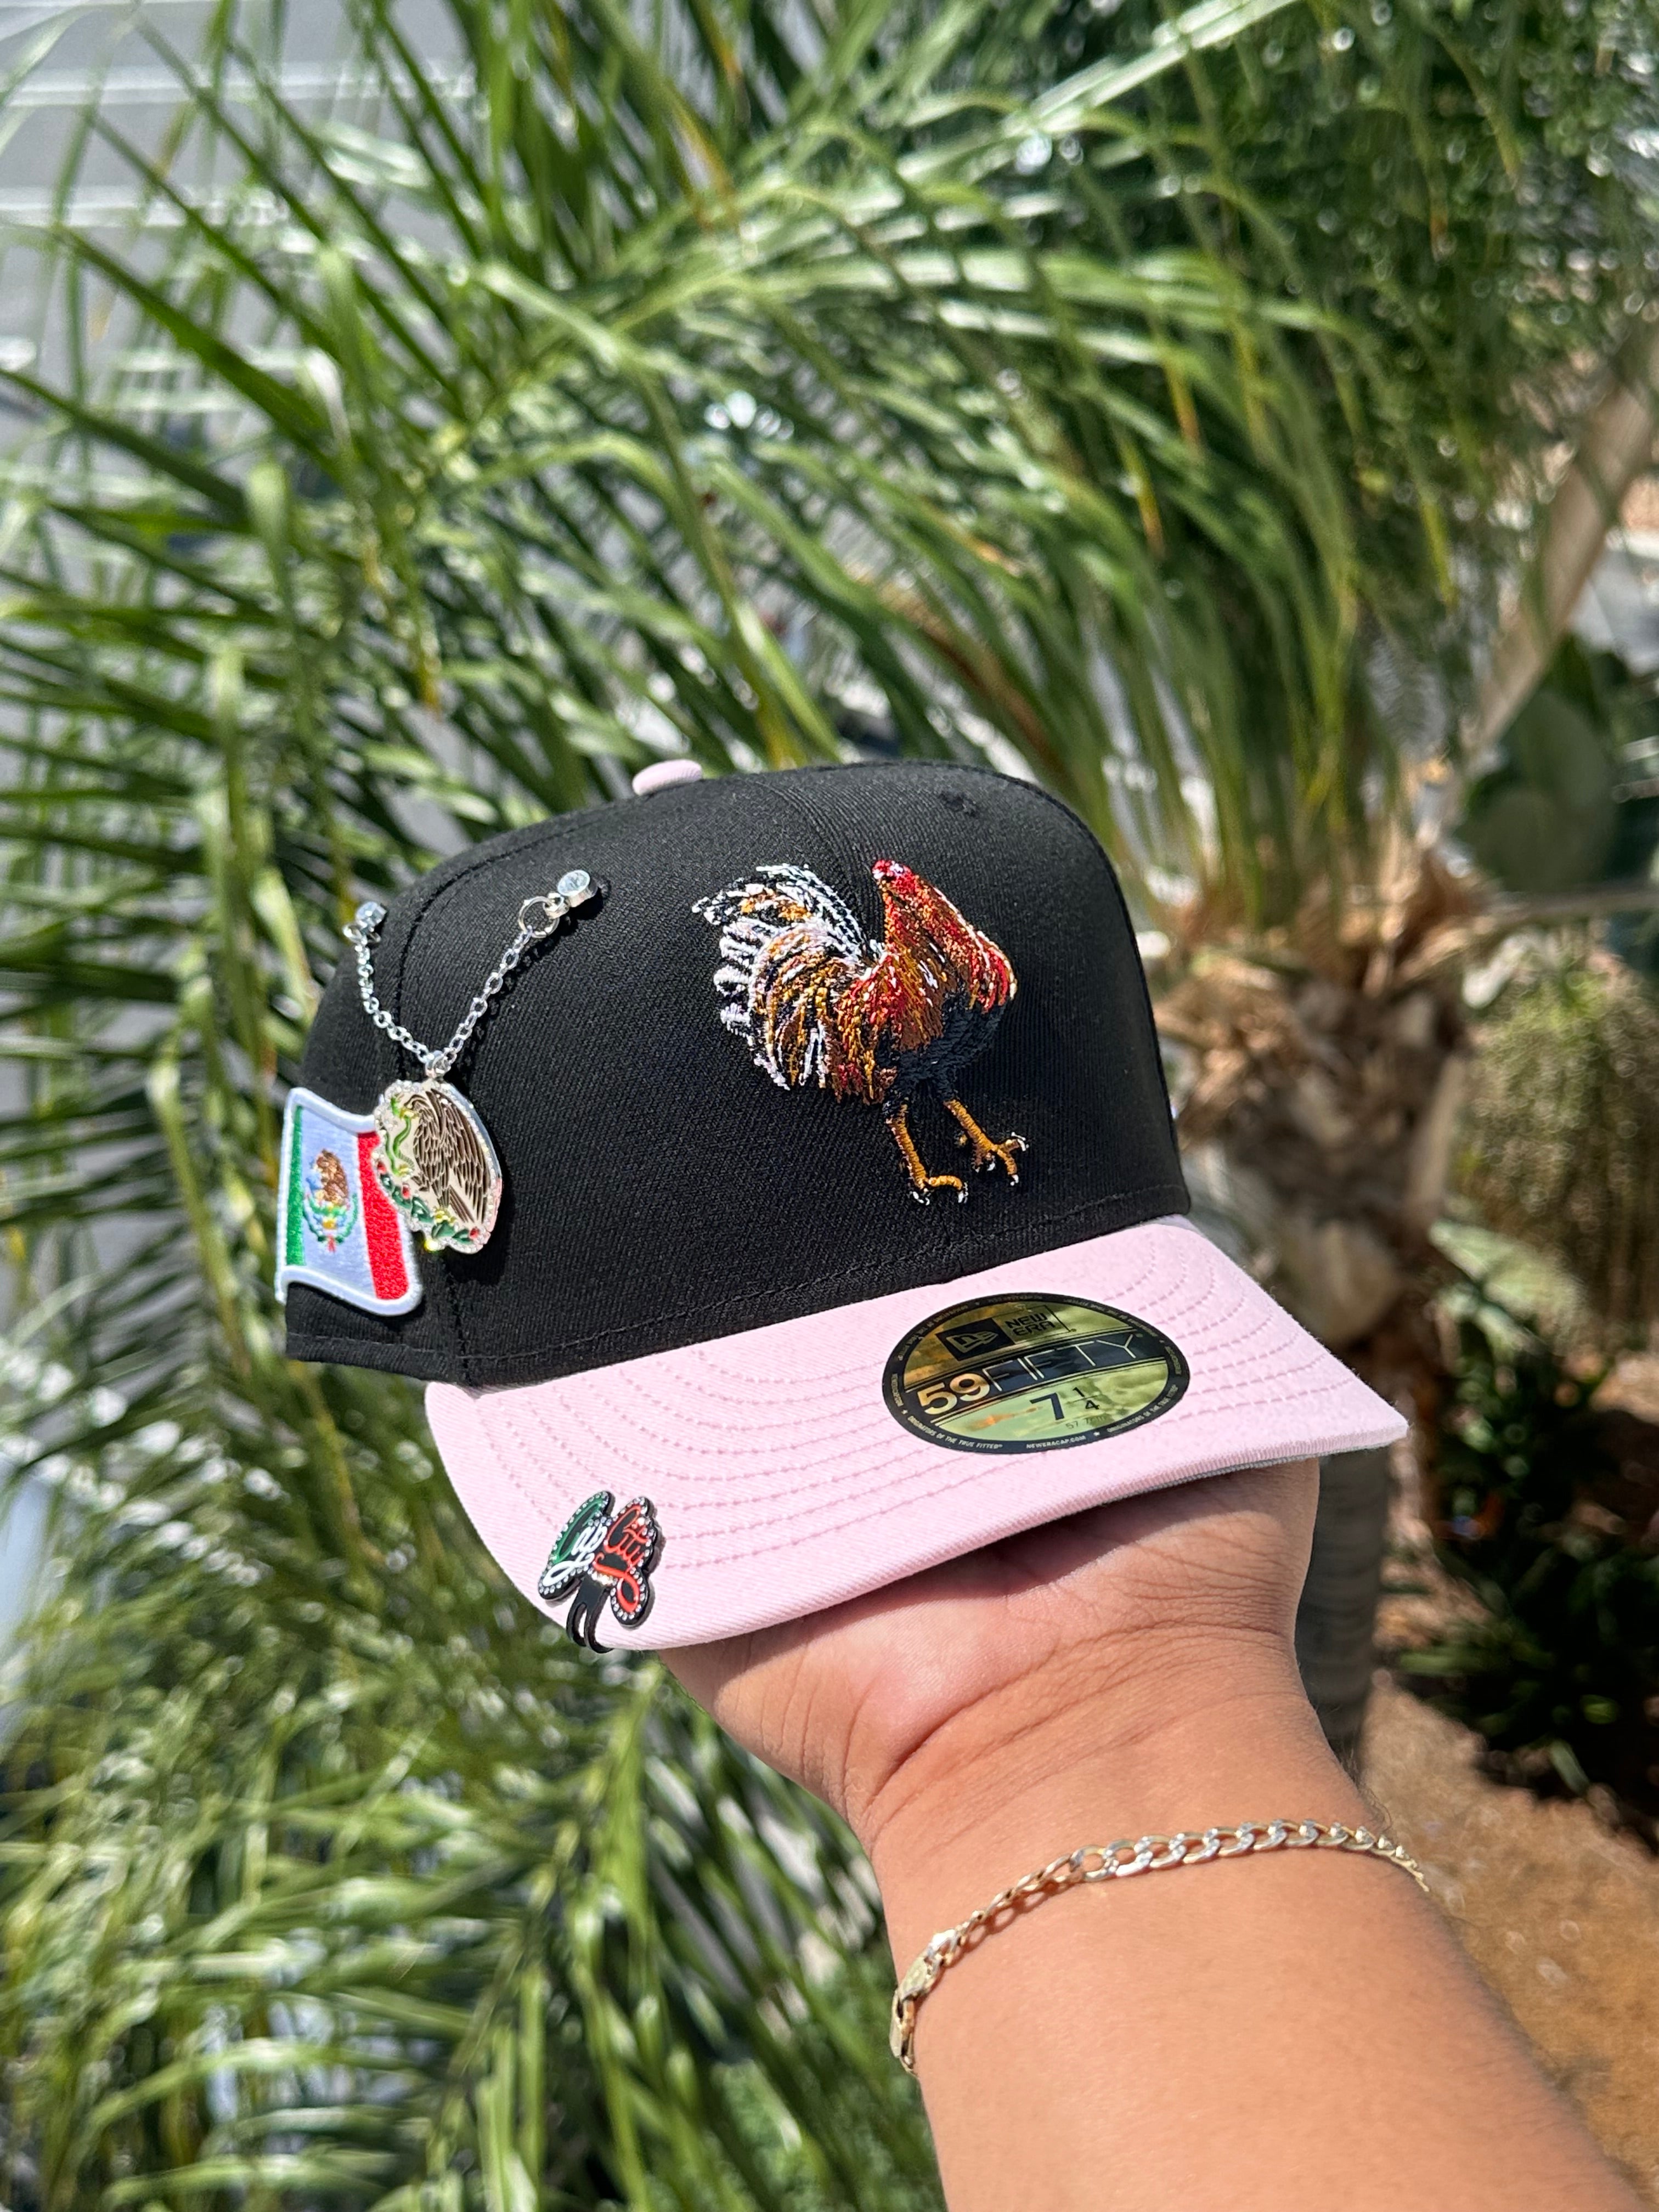 NEW ERA EXCLUSIVE 59FIFTY BLACK/SOFT PINK MEXICO "EL GALLO" TWO TONE W/ MEXICO FLAG PATCH